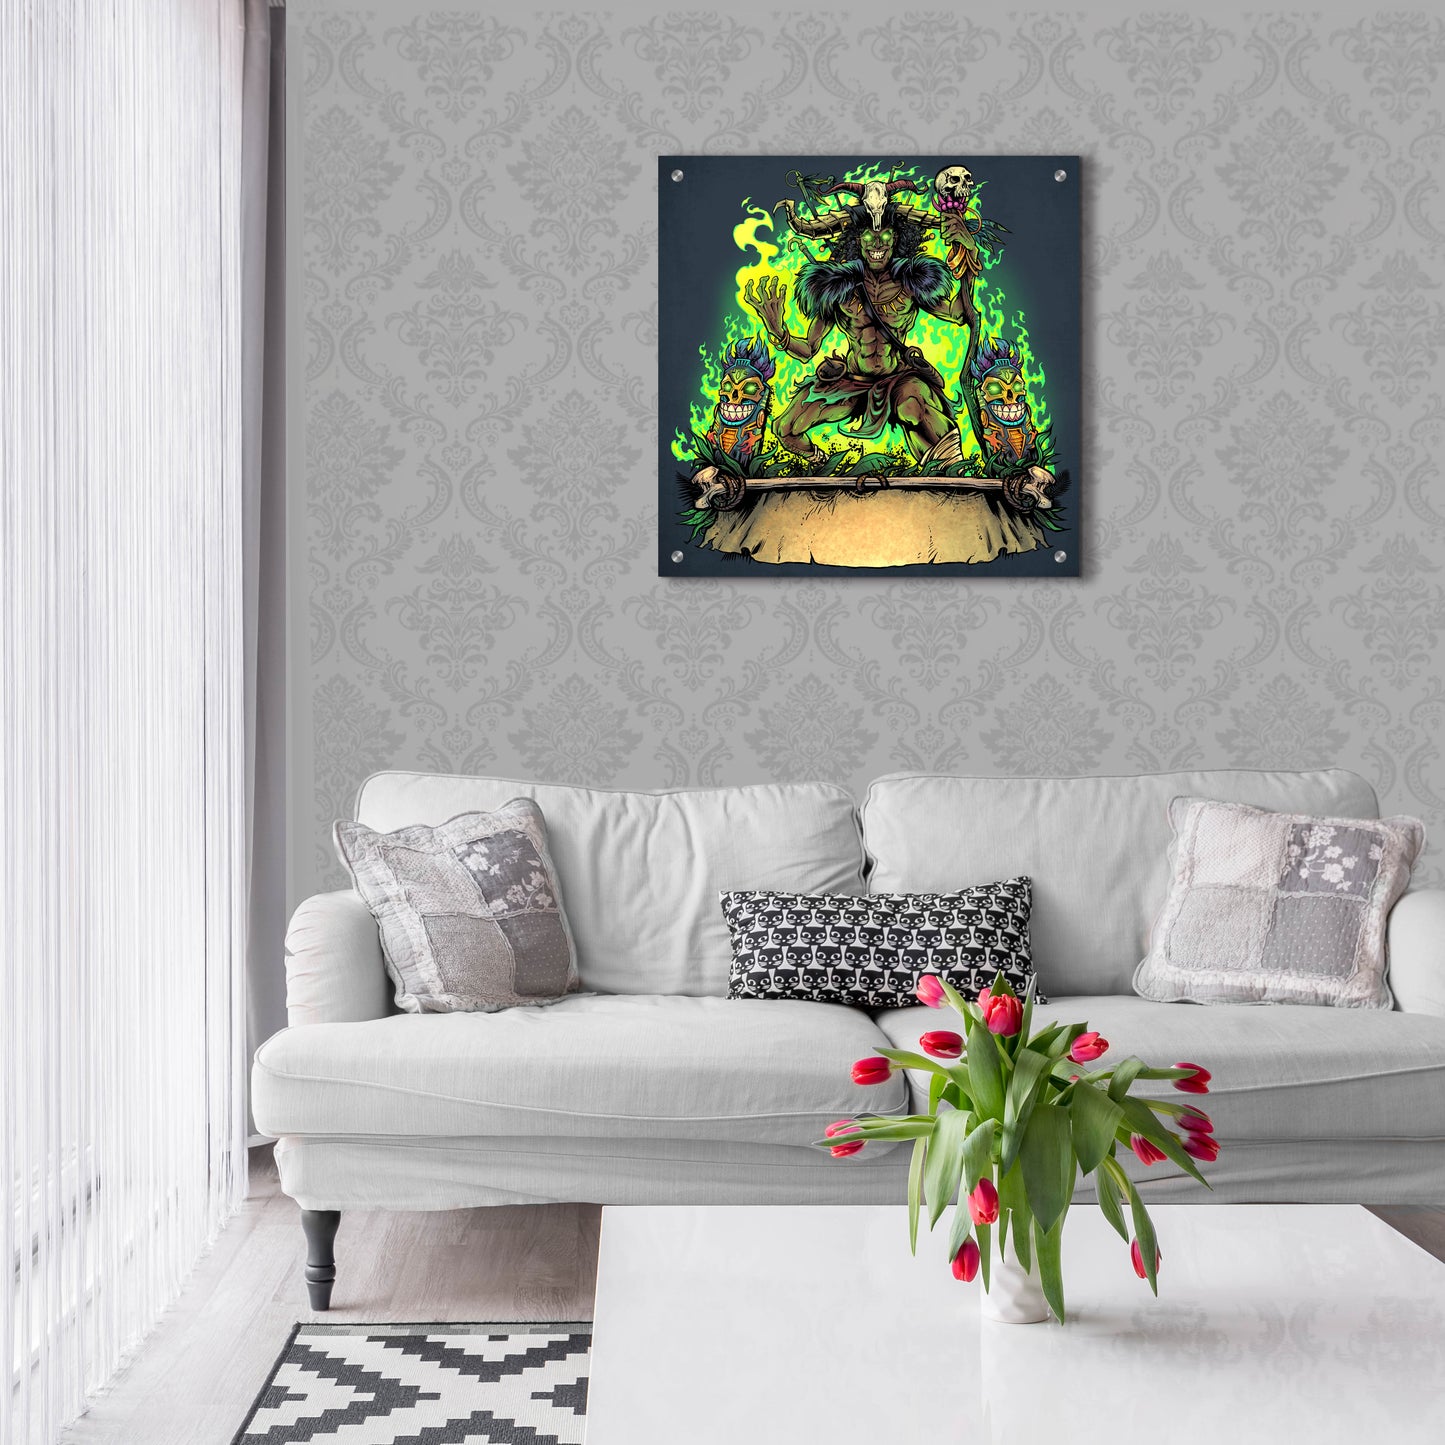 Epic Art 'Witch Doctor' by Flyland Designs, Acrylic Glass Wall Art,24x24